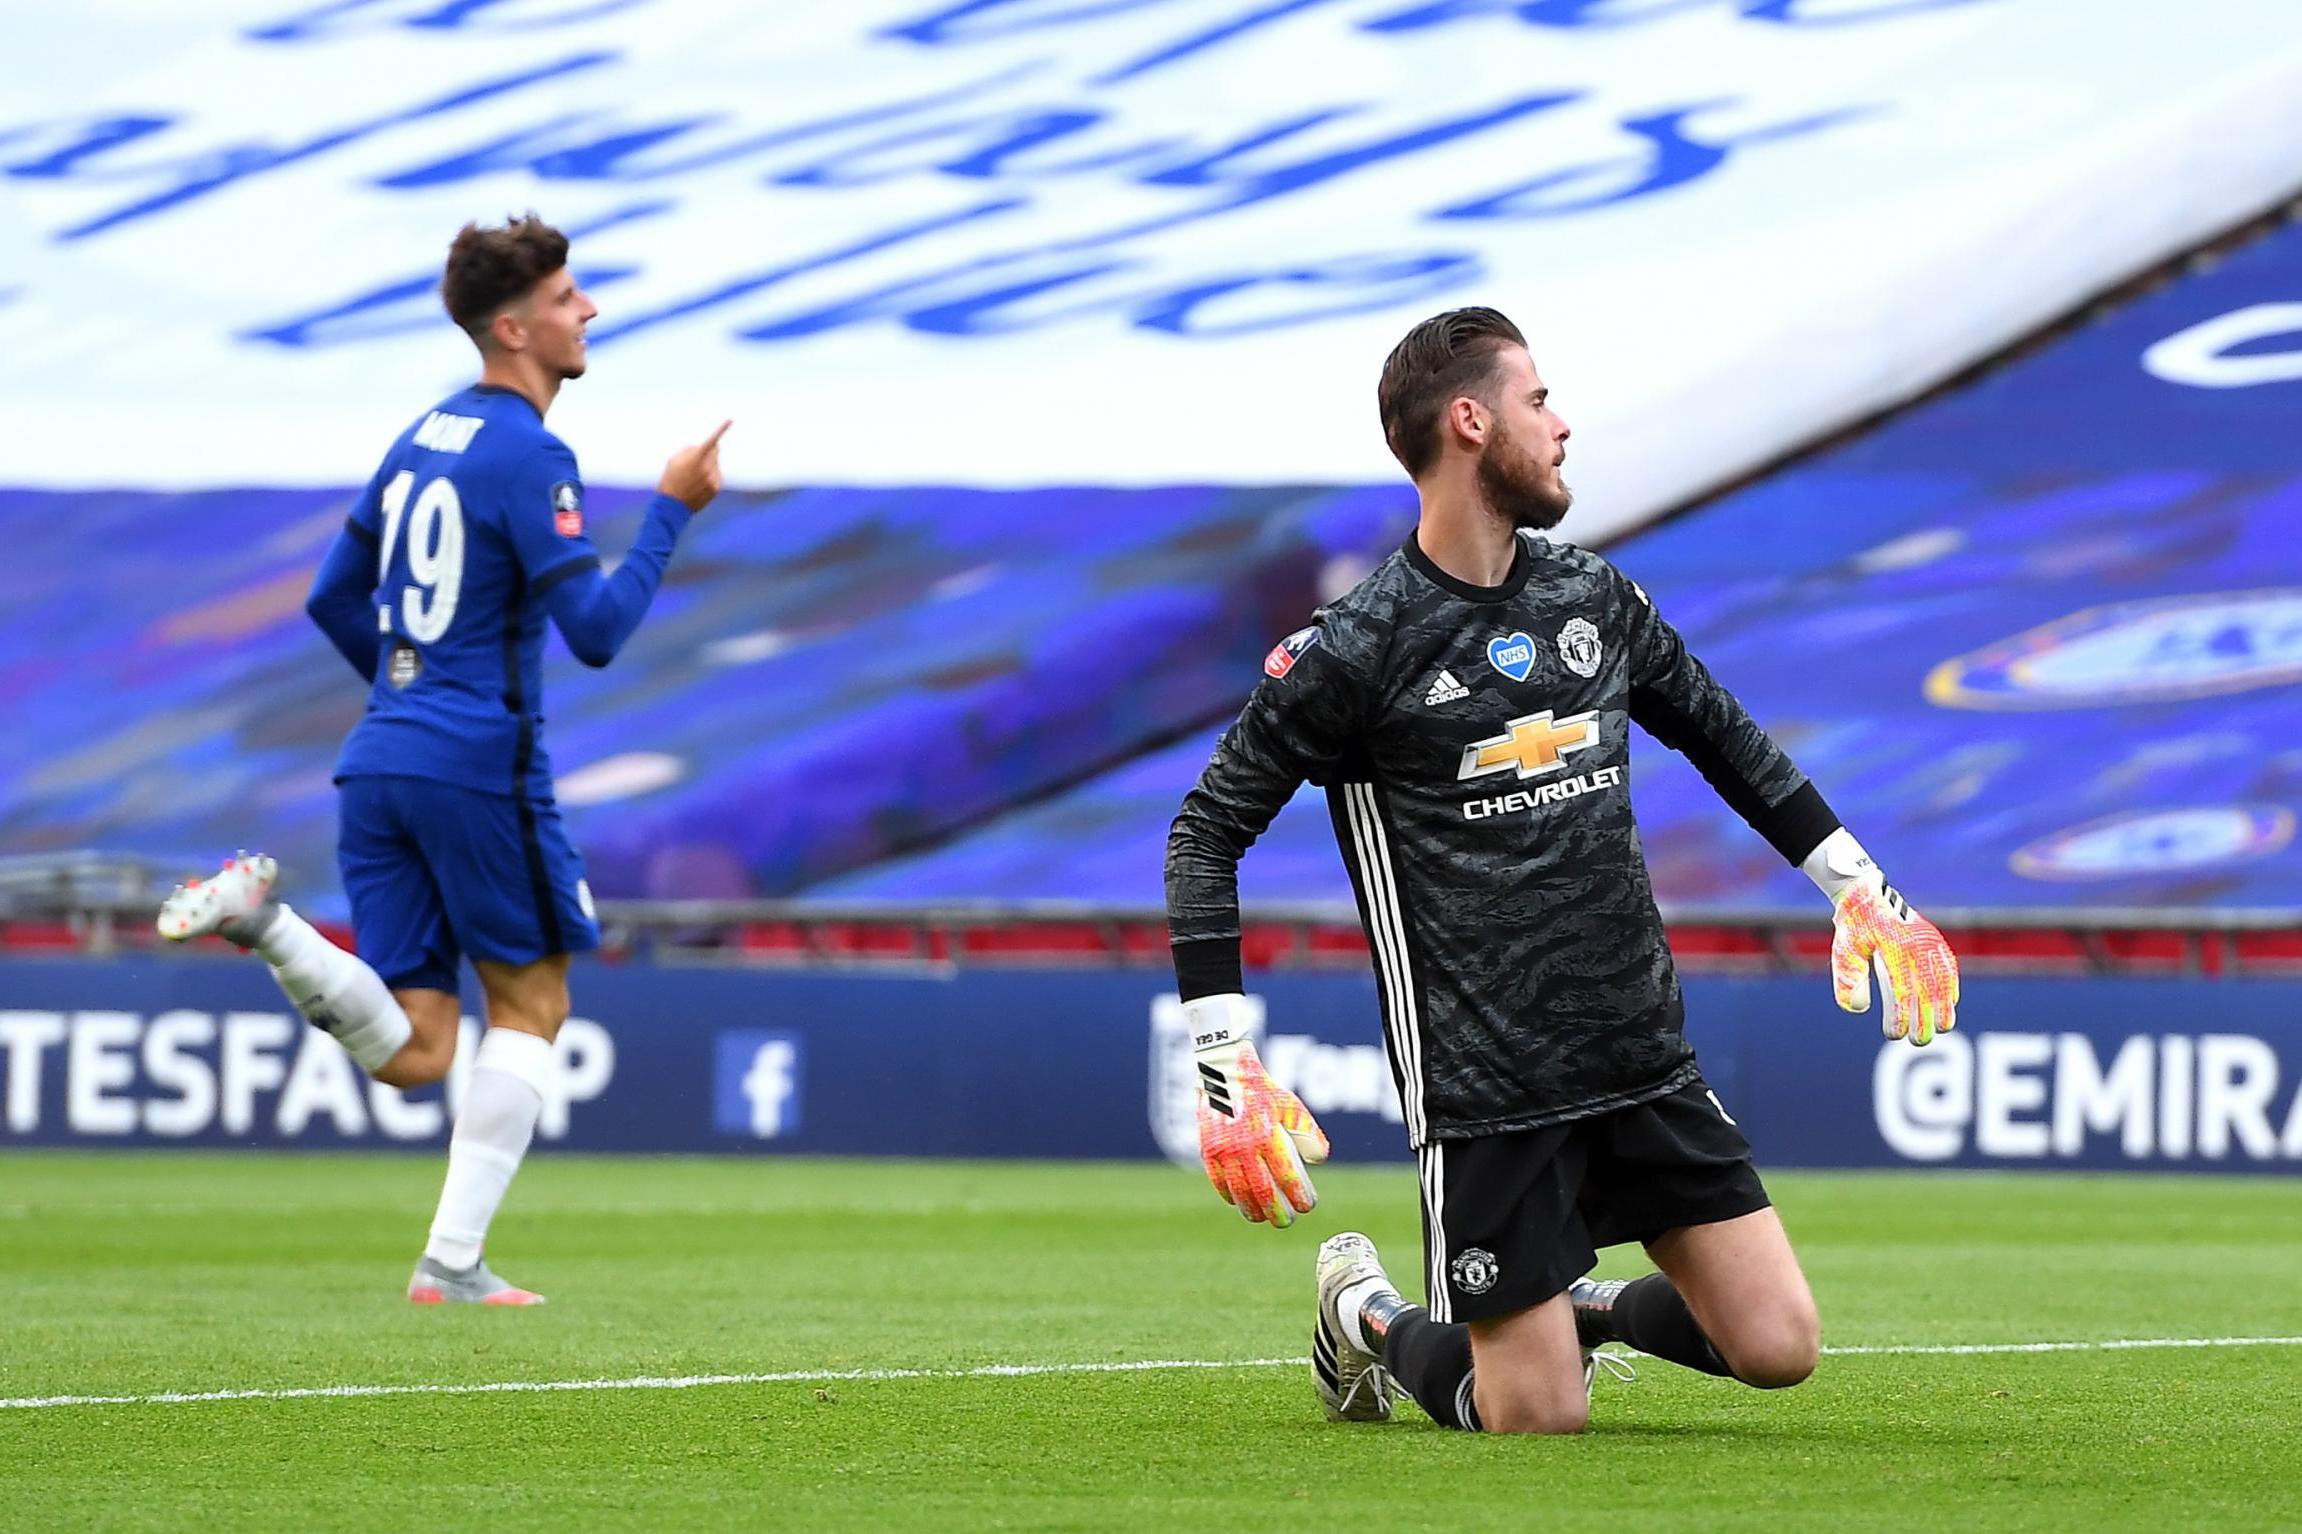 Mount celebrates as De Gea comes to terms with his howler